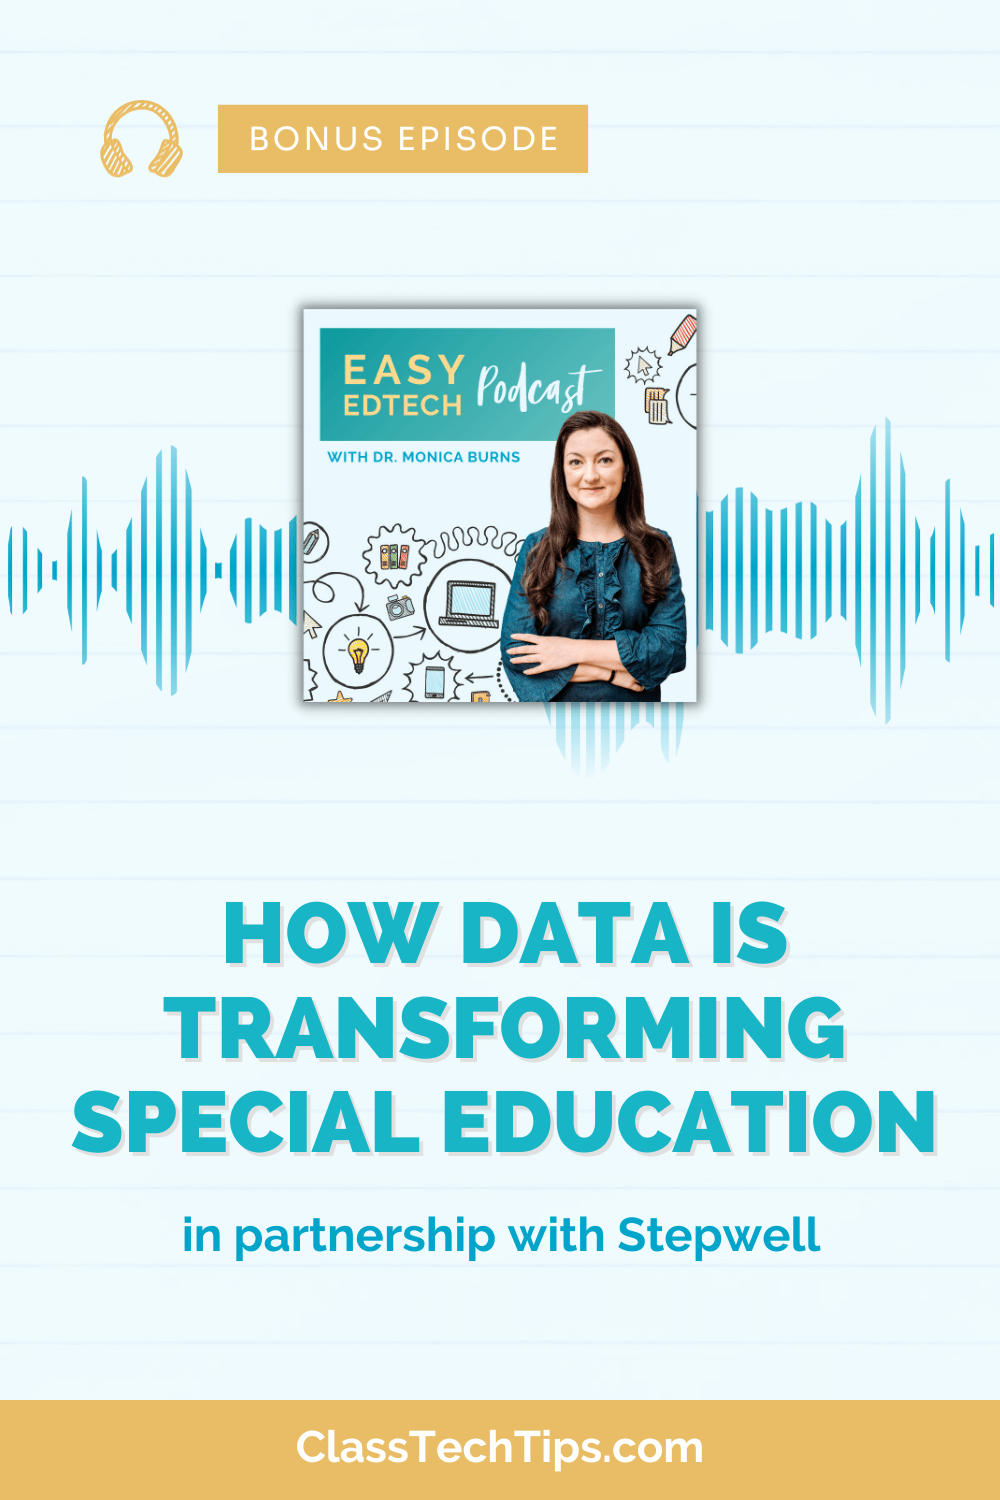 Image featuring the podcast logo and visual elements that symbolize the impact of data on Special Education.